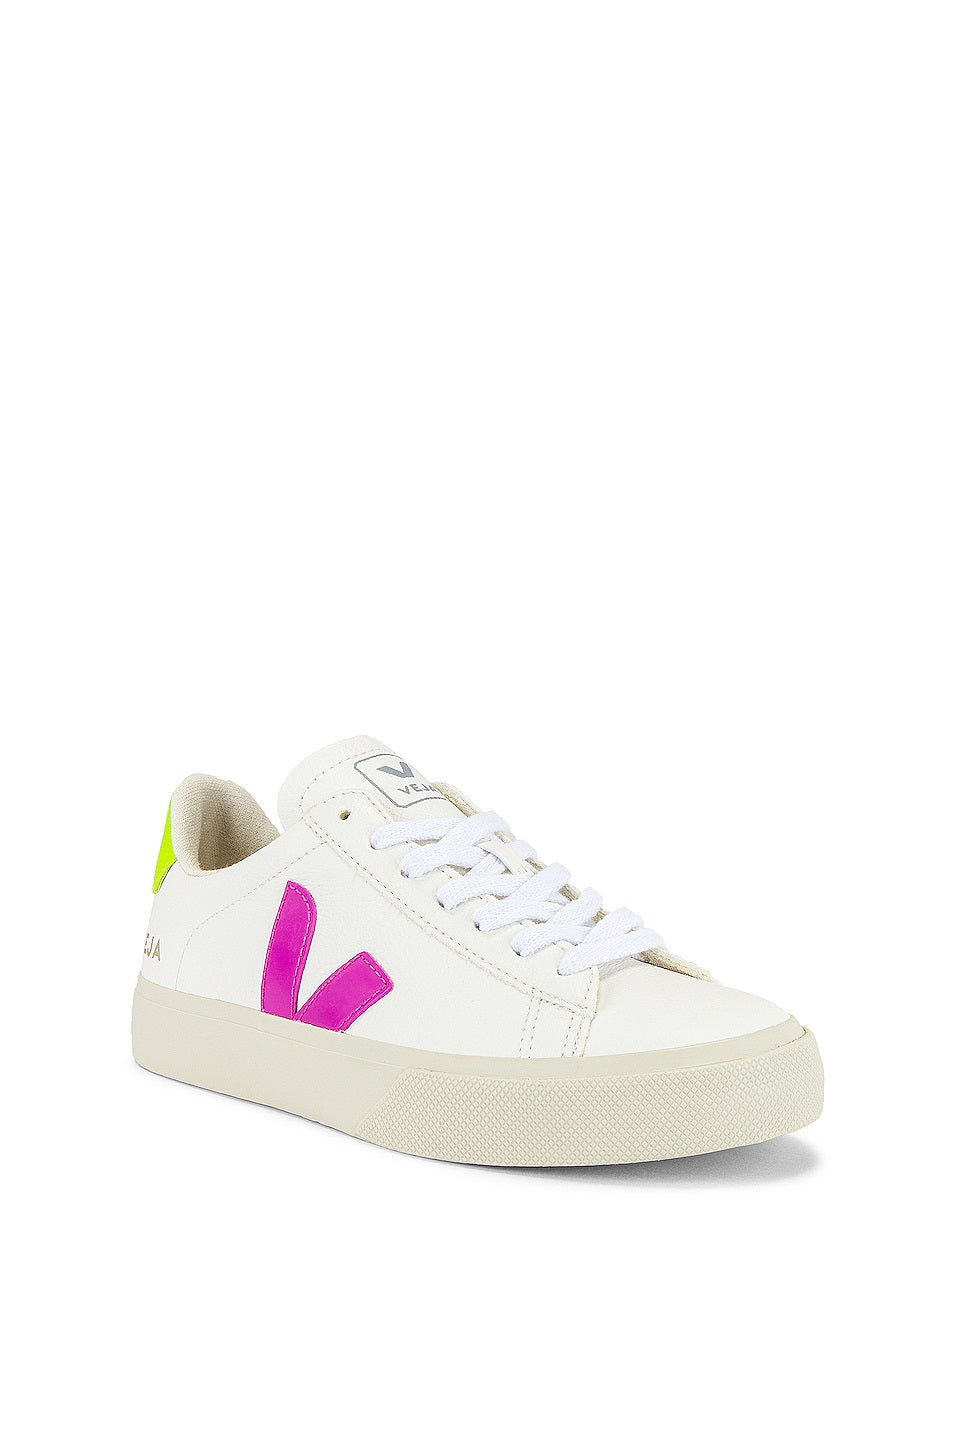 Veja Sneakers- Campo Chromefree Leather Extra White Ultraviolet Jaune Fluo